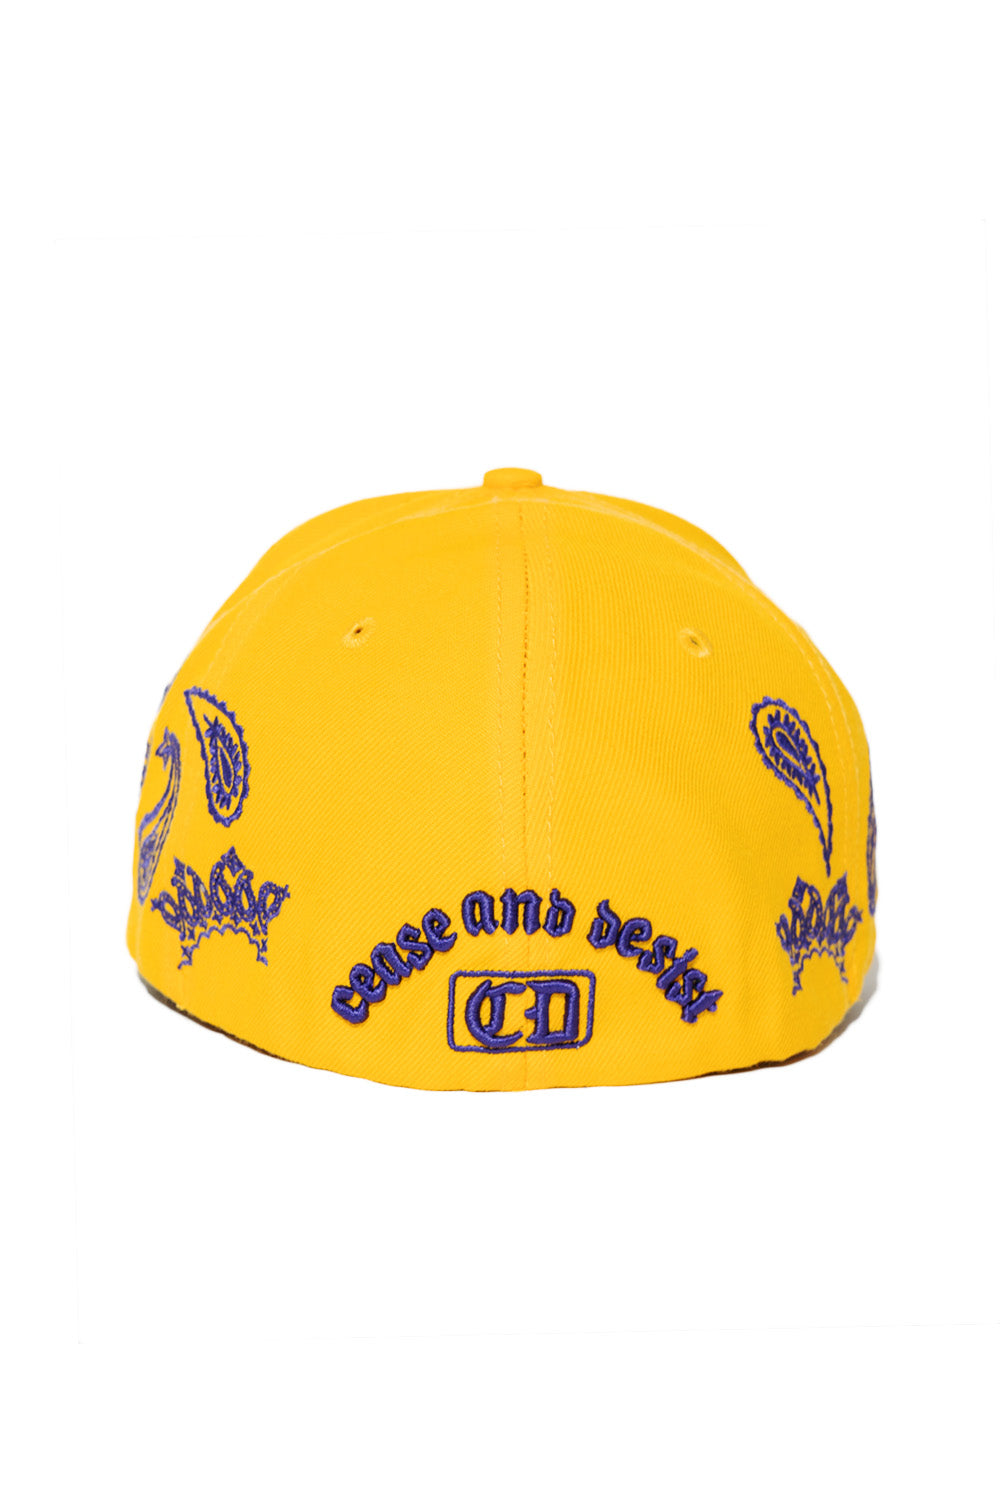 PAISLEY CITY TOUR FITTED (YELLOW LOS ANGELES)